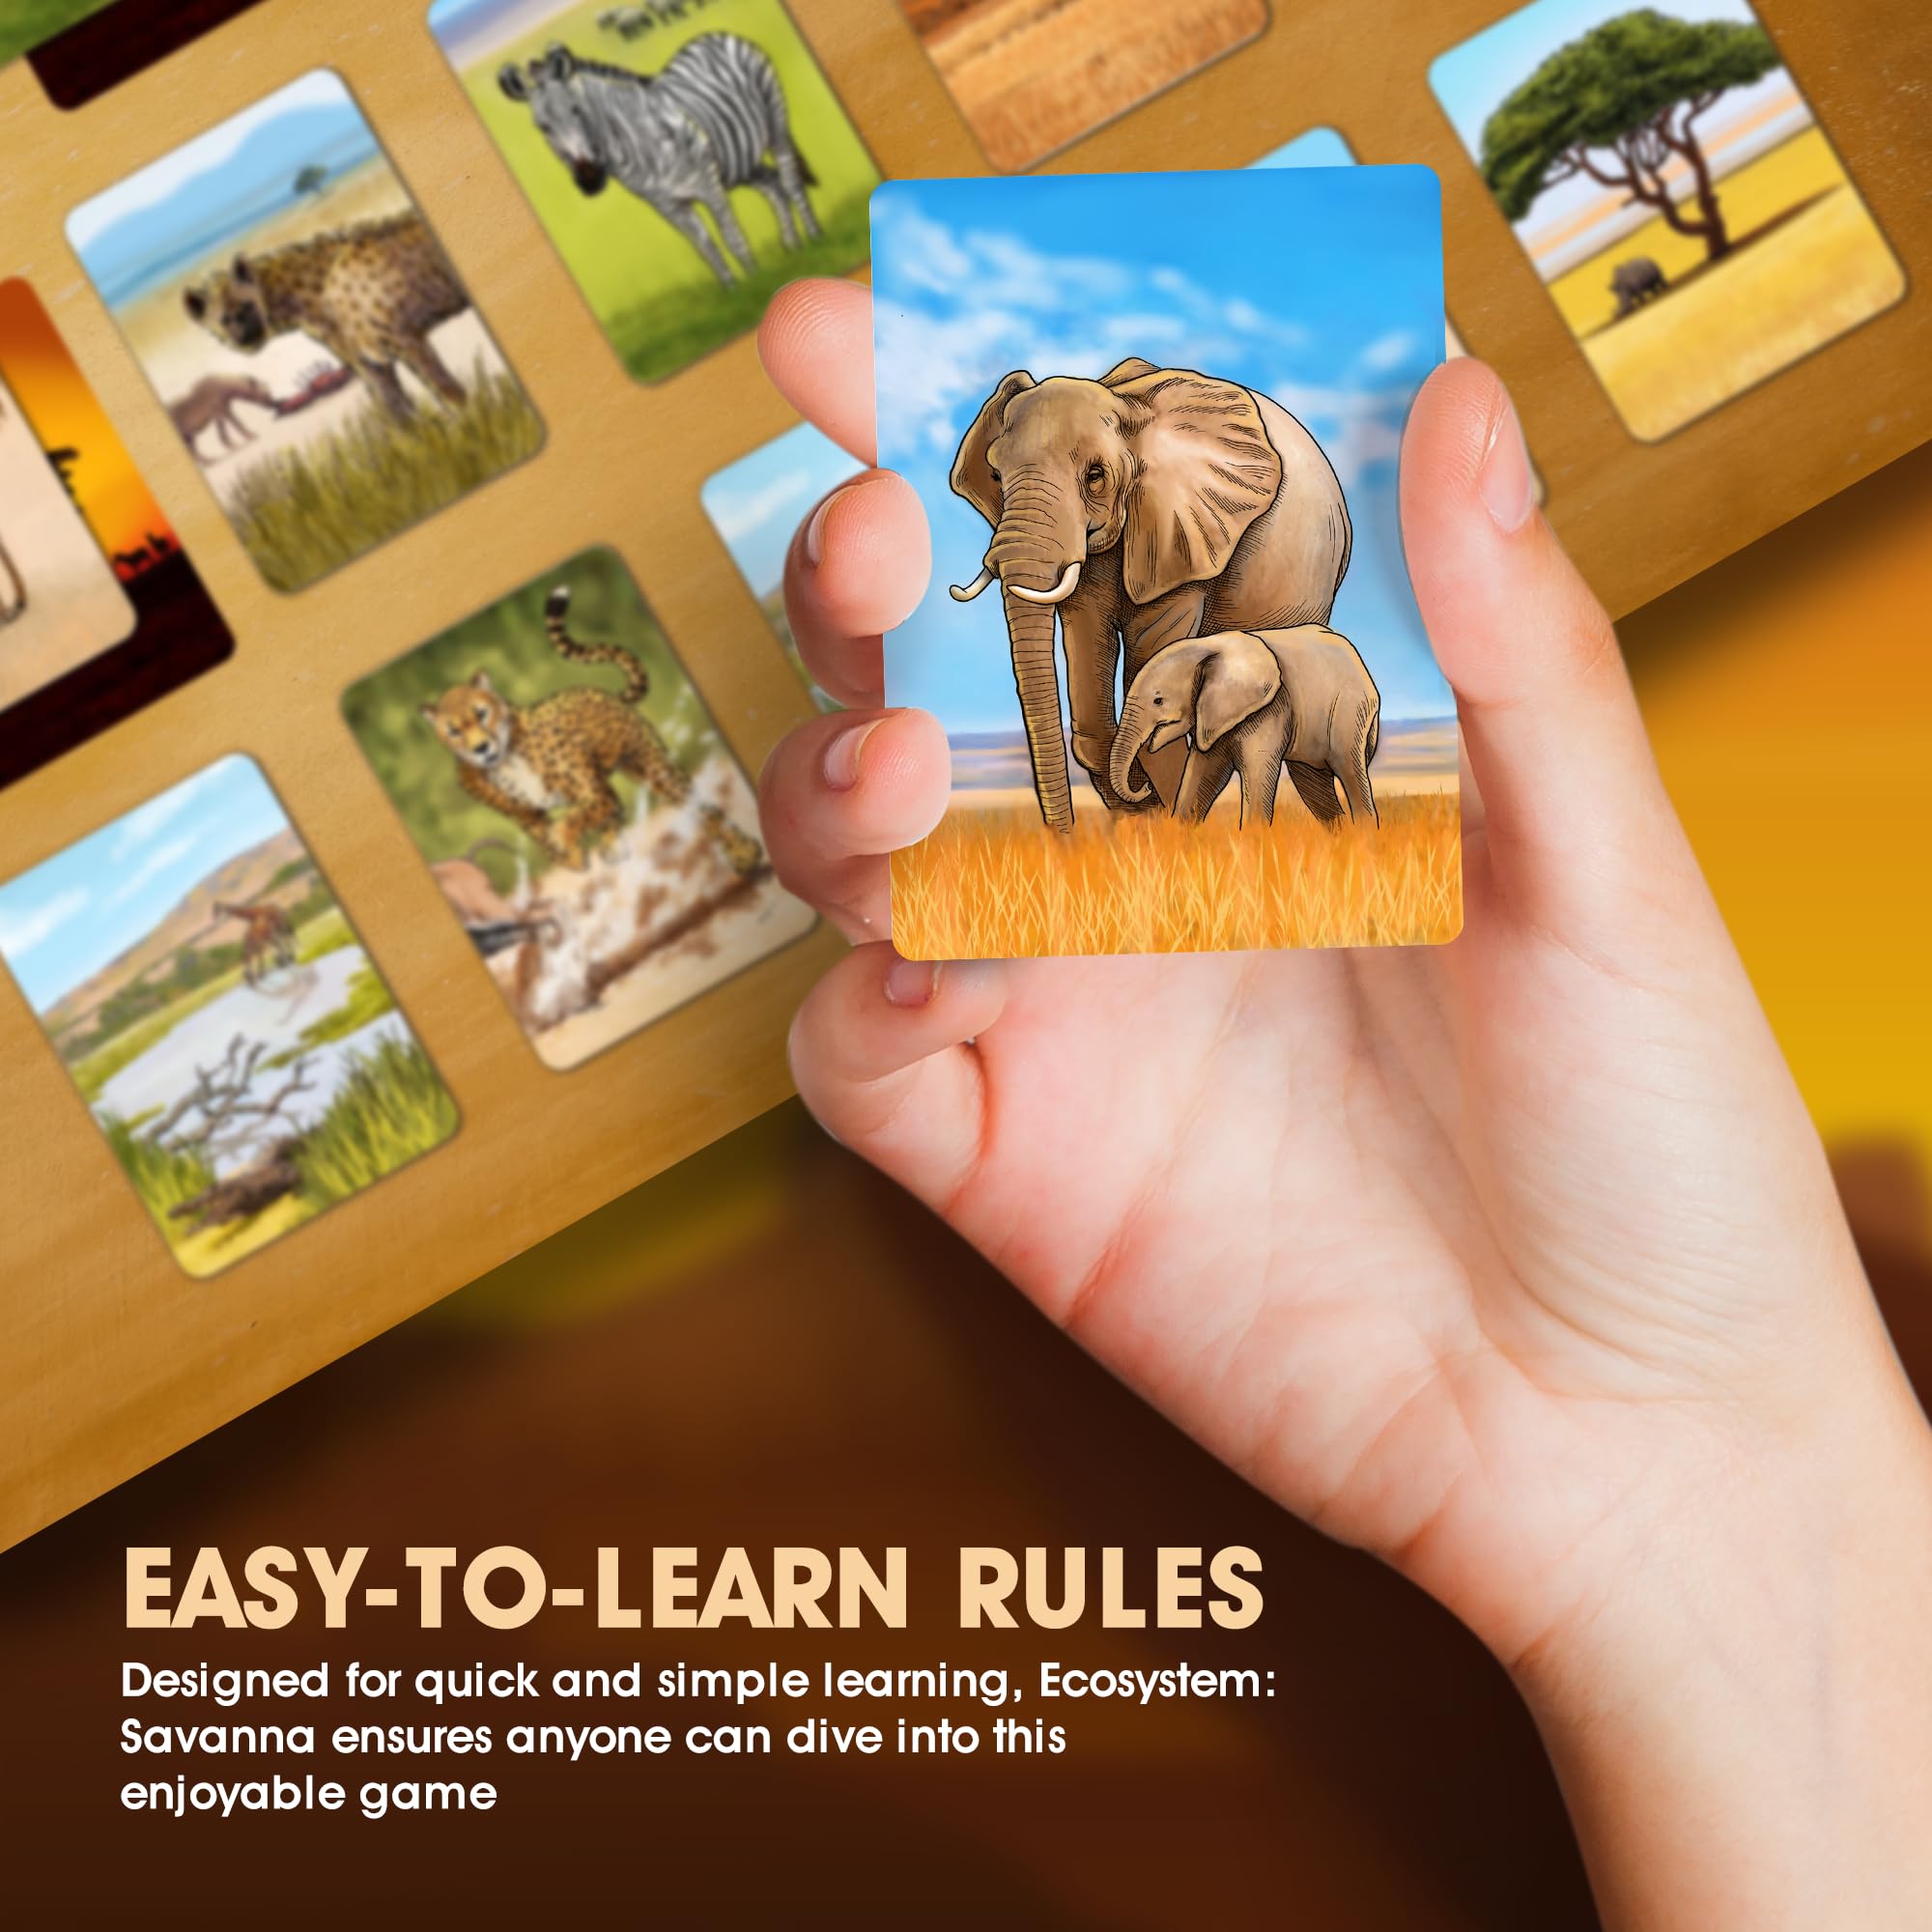 Ecosystem: Savanna - A Family Card Game About Animals on Grassy Woodland of African Savanna - Fun & Educational Ecology Game for Kids & Adults - Strategy Board Game for Gamers, Students & Teachers